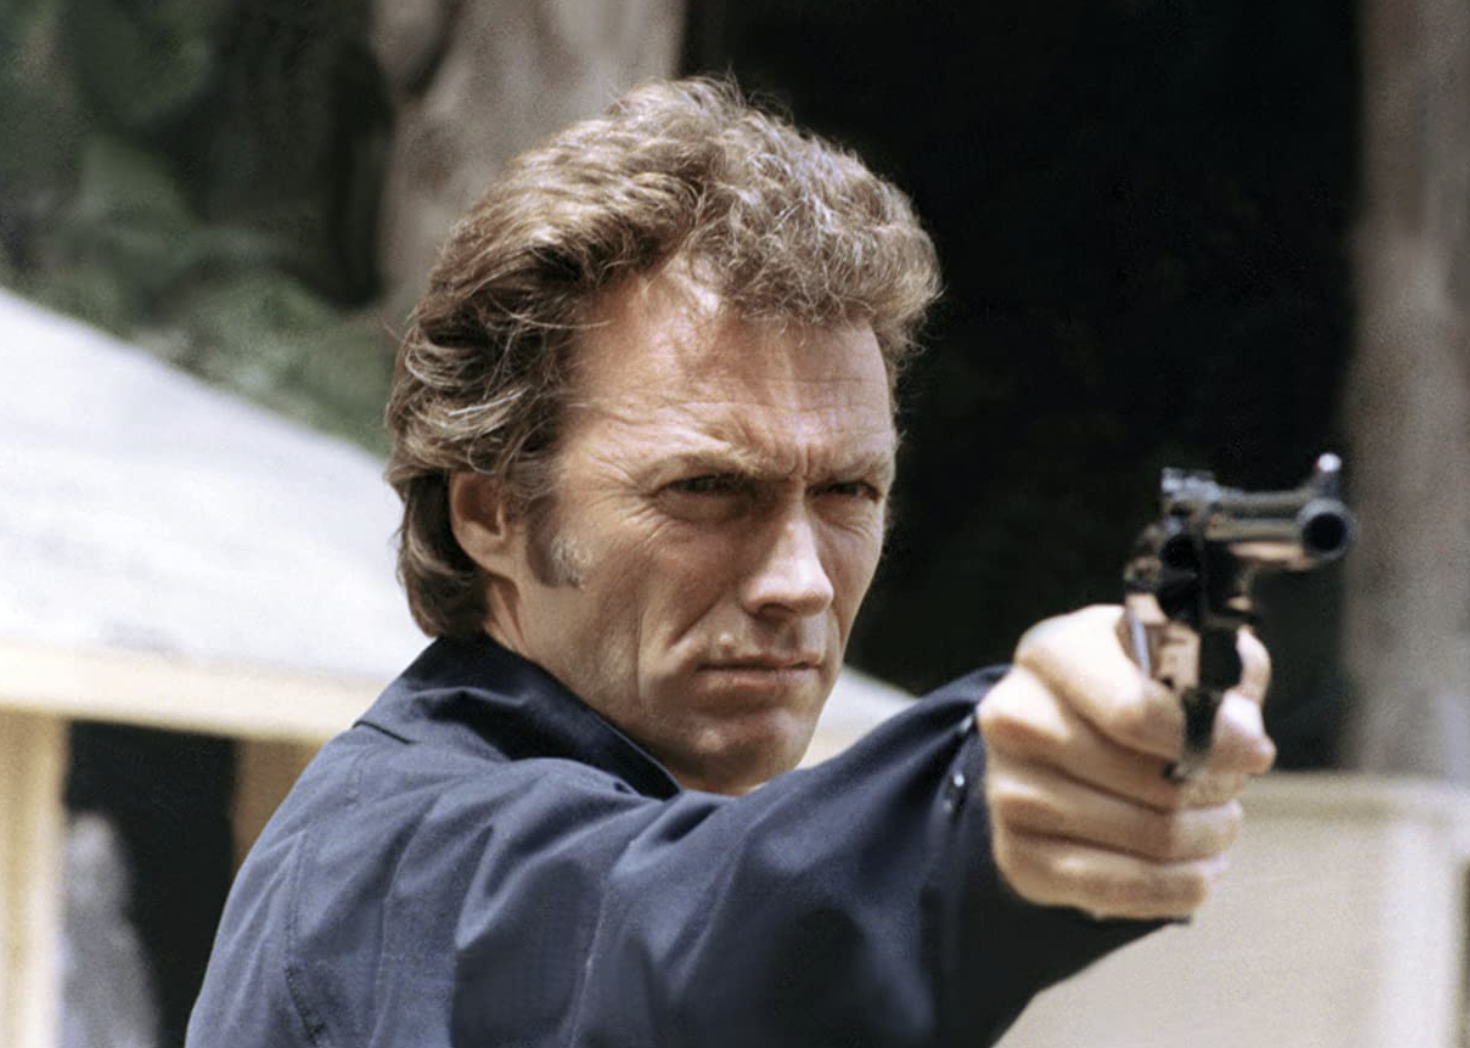 Clint Eastwood in a scene from "Magnum Force".